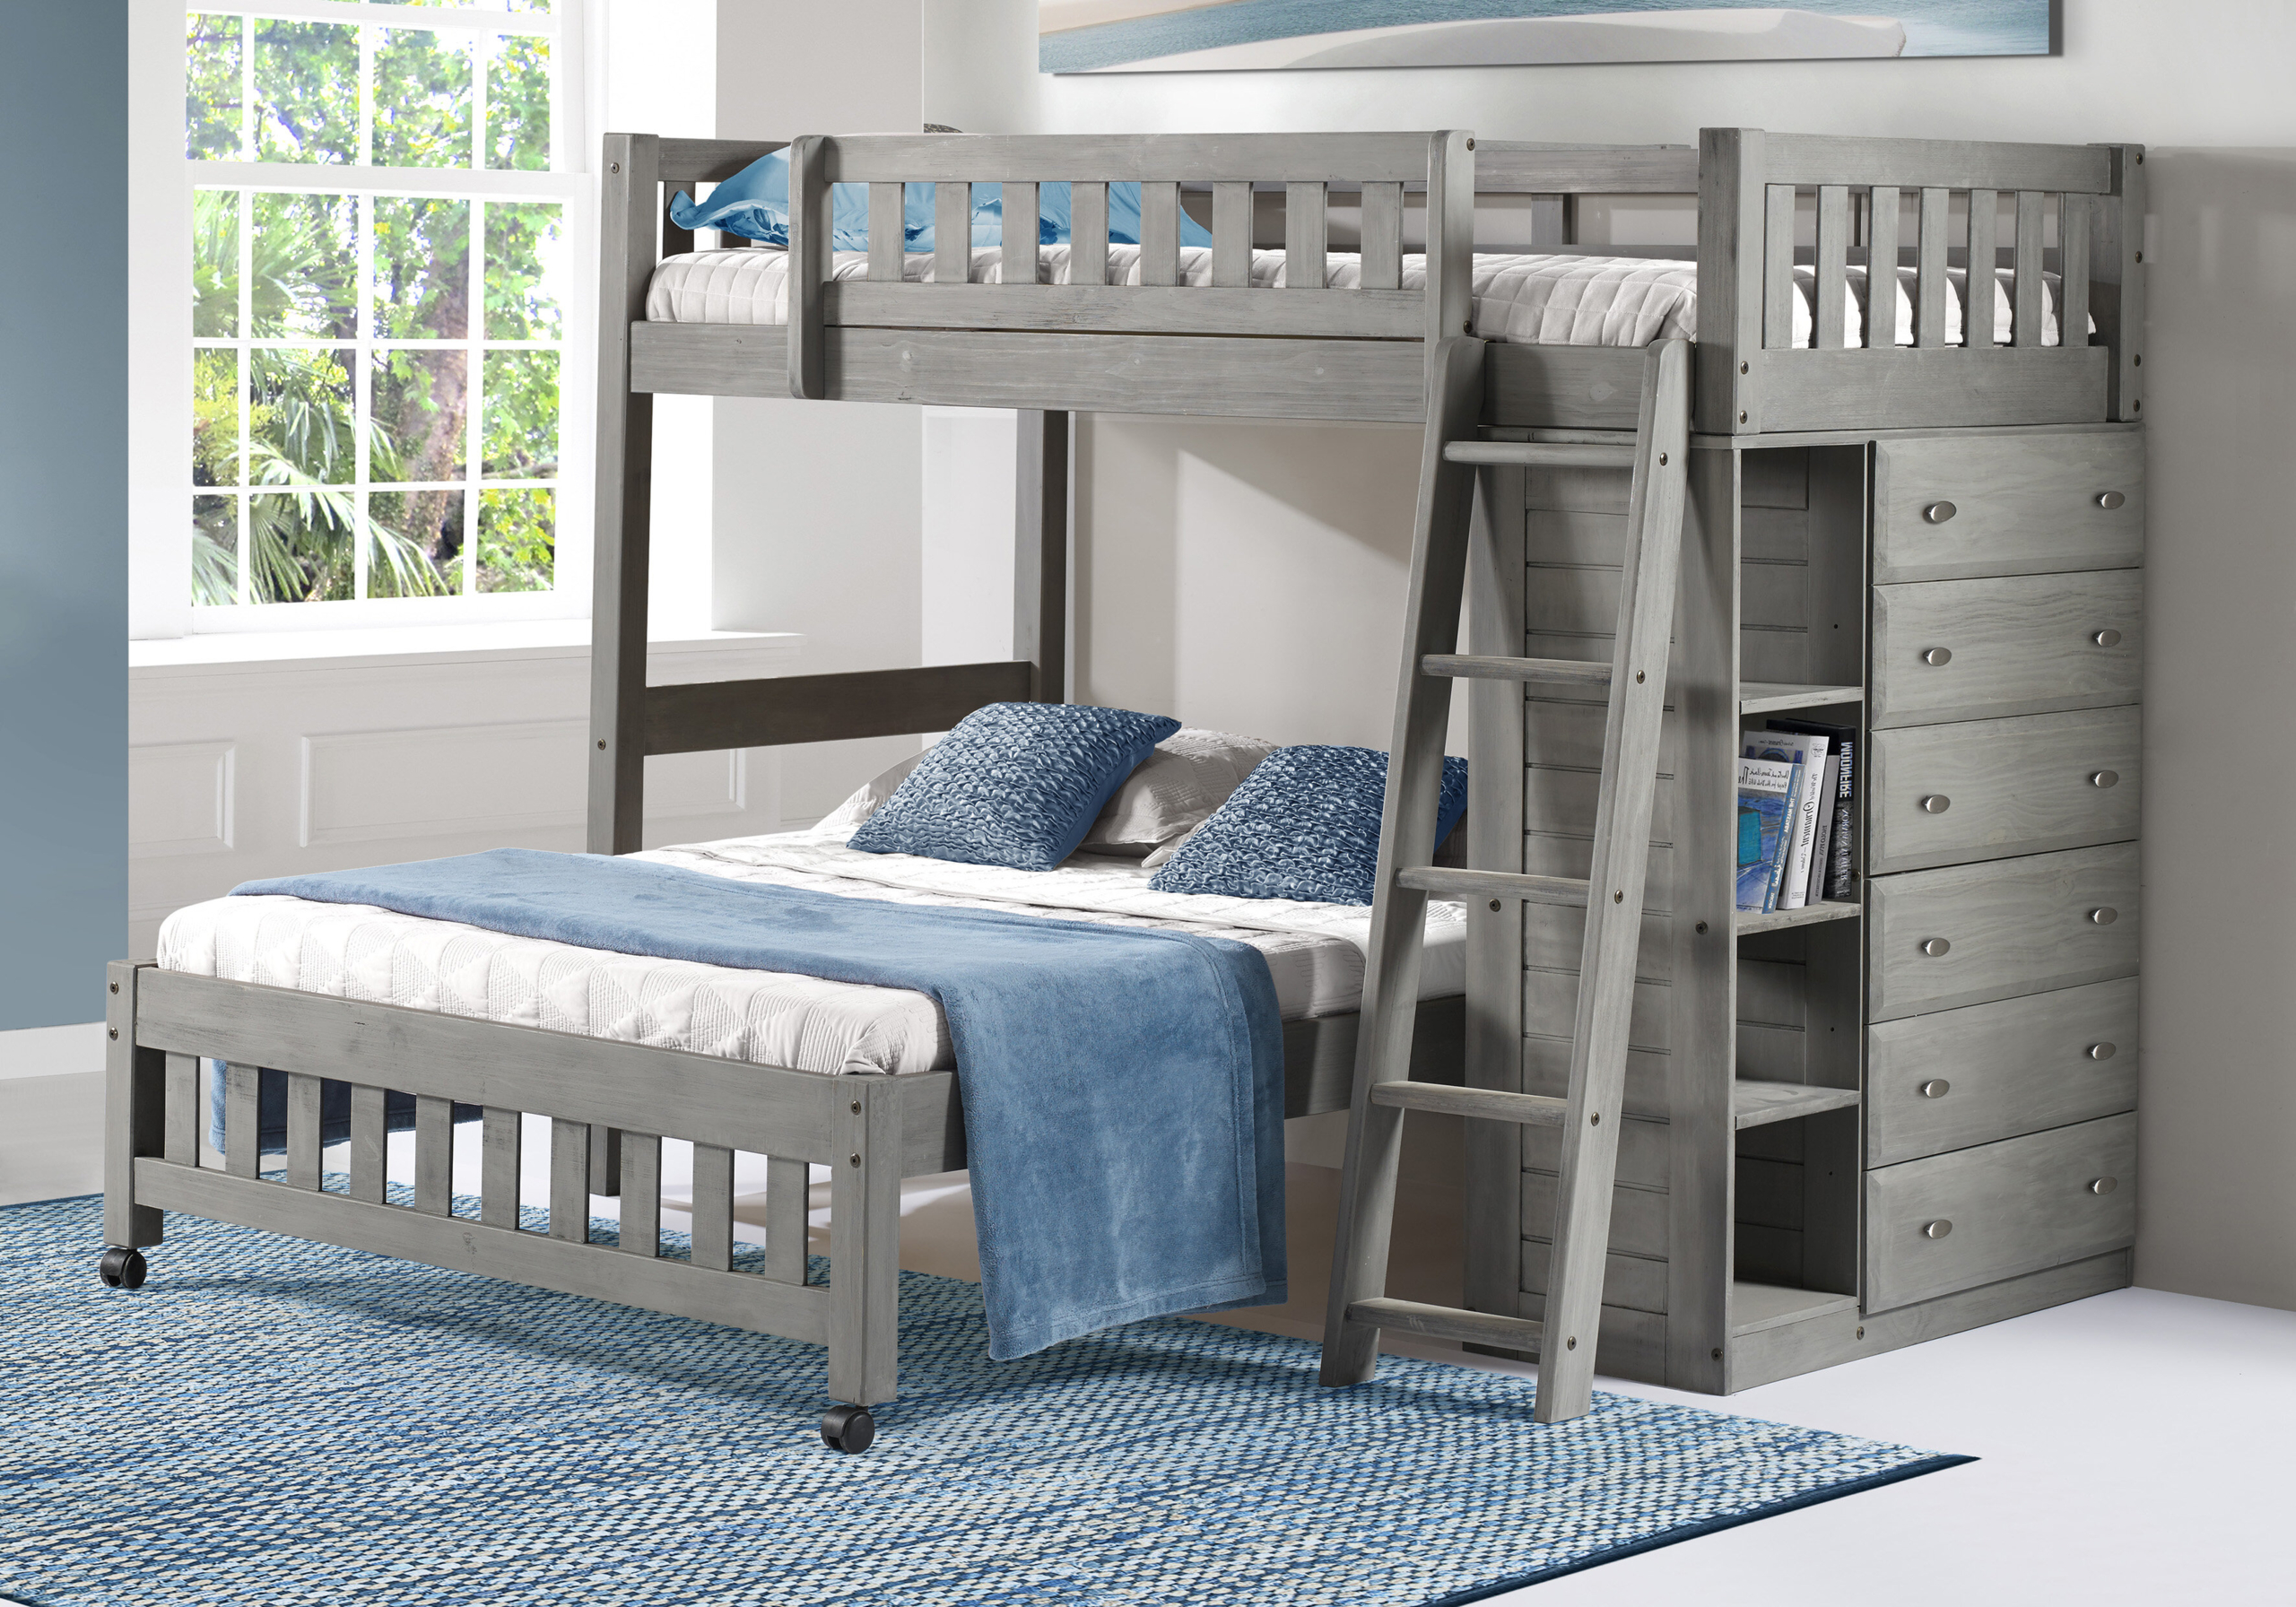 Bunk Beds With Dressers Visualhunt, Bunk Bed Sets With Dresser